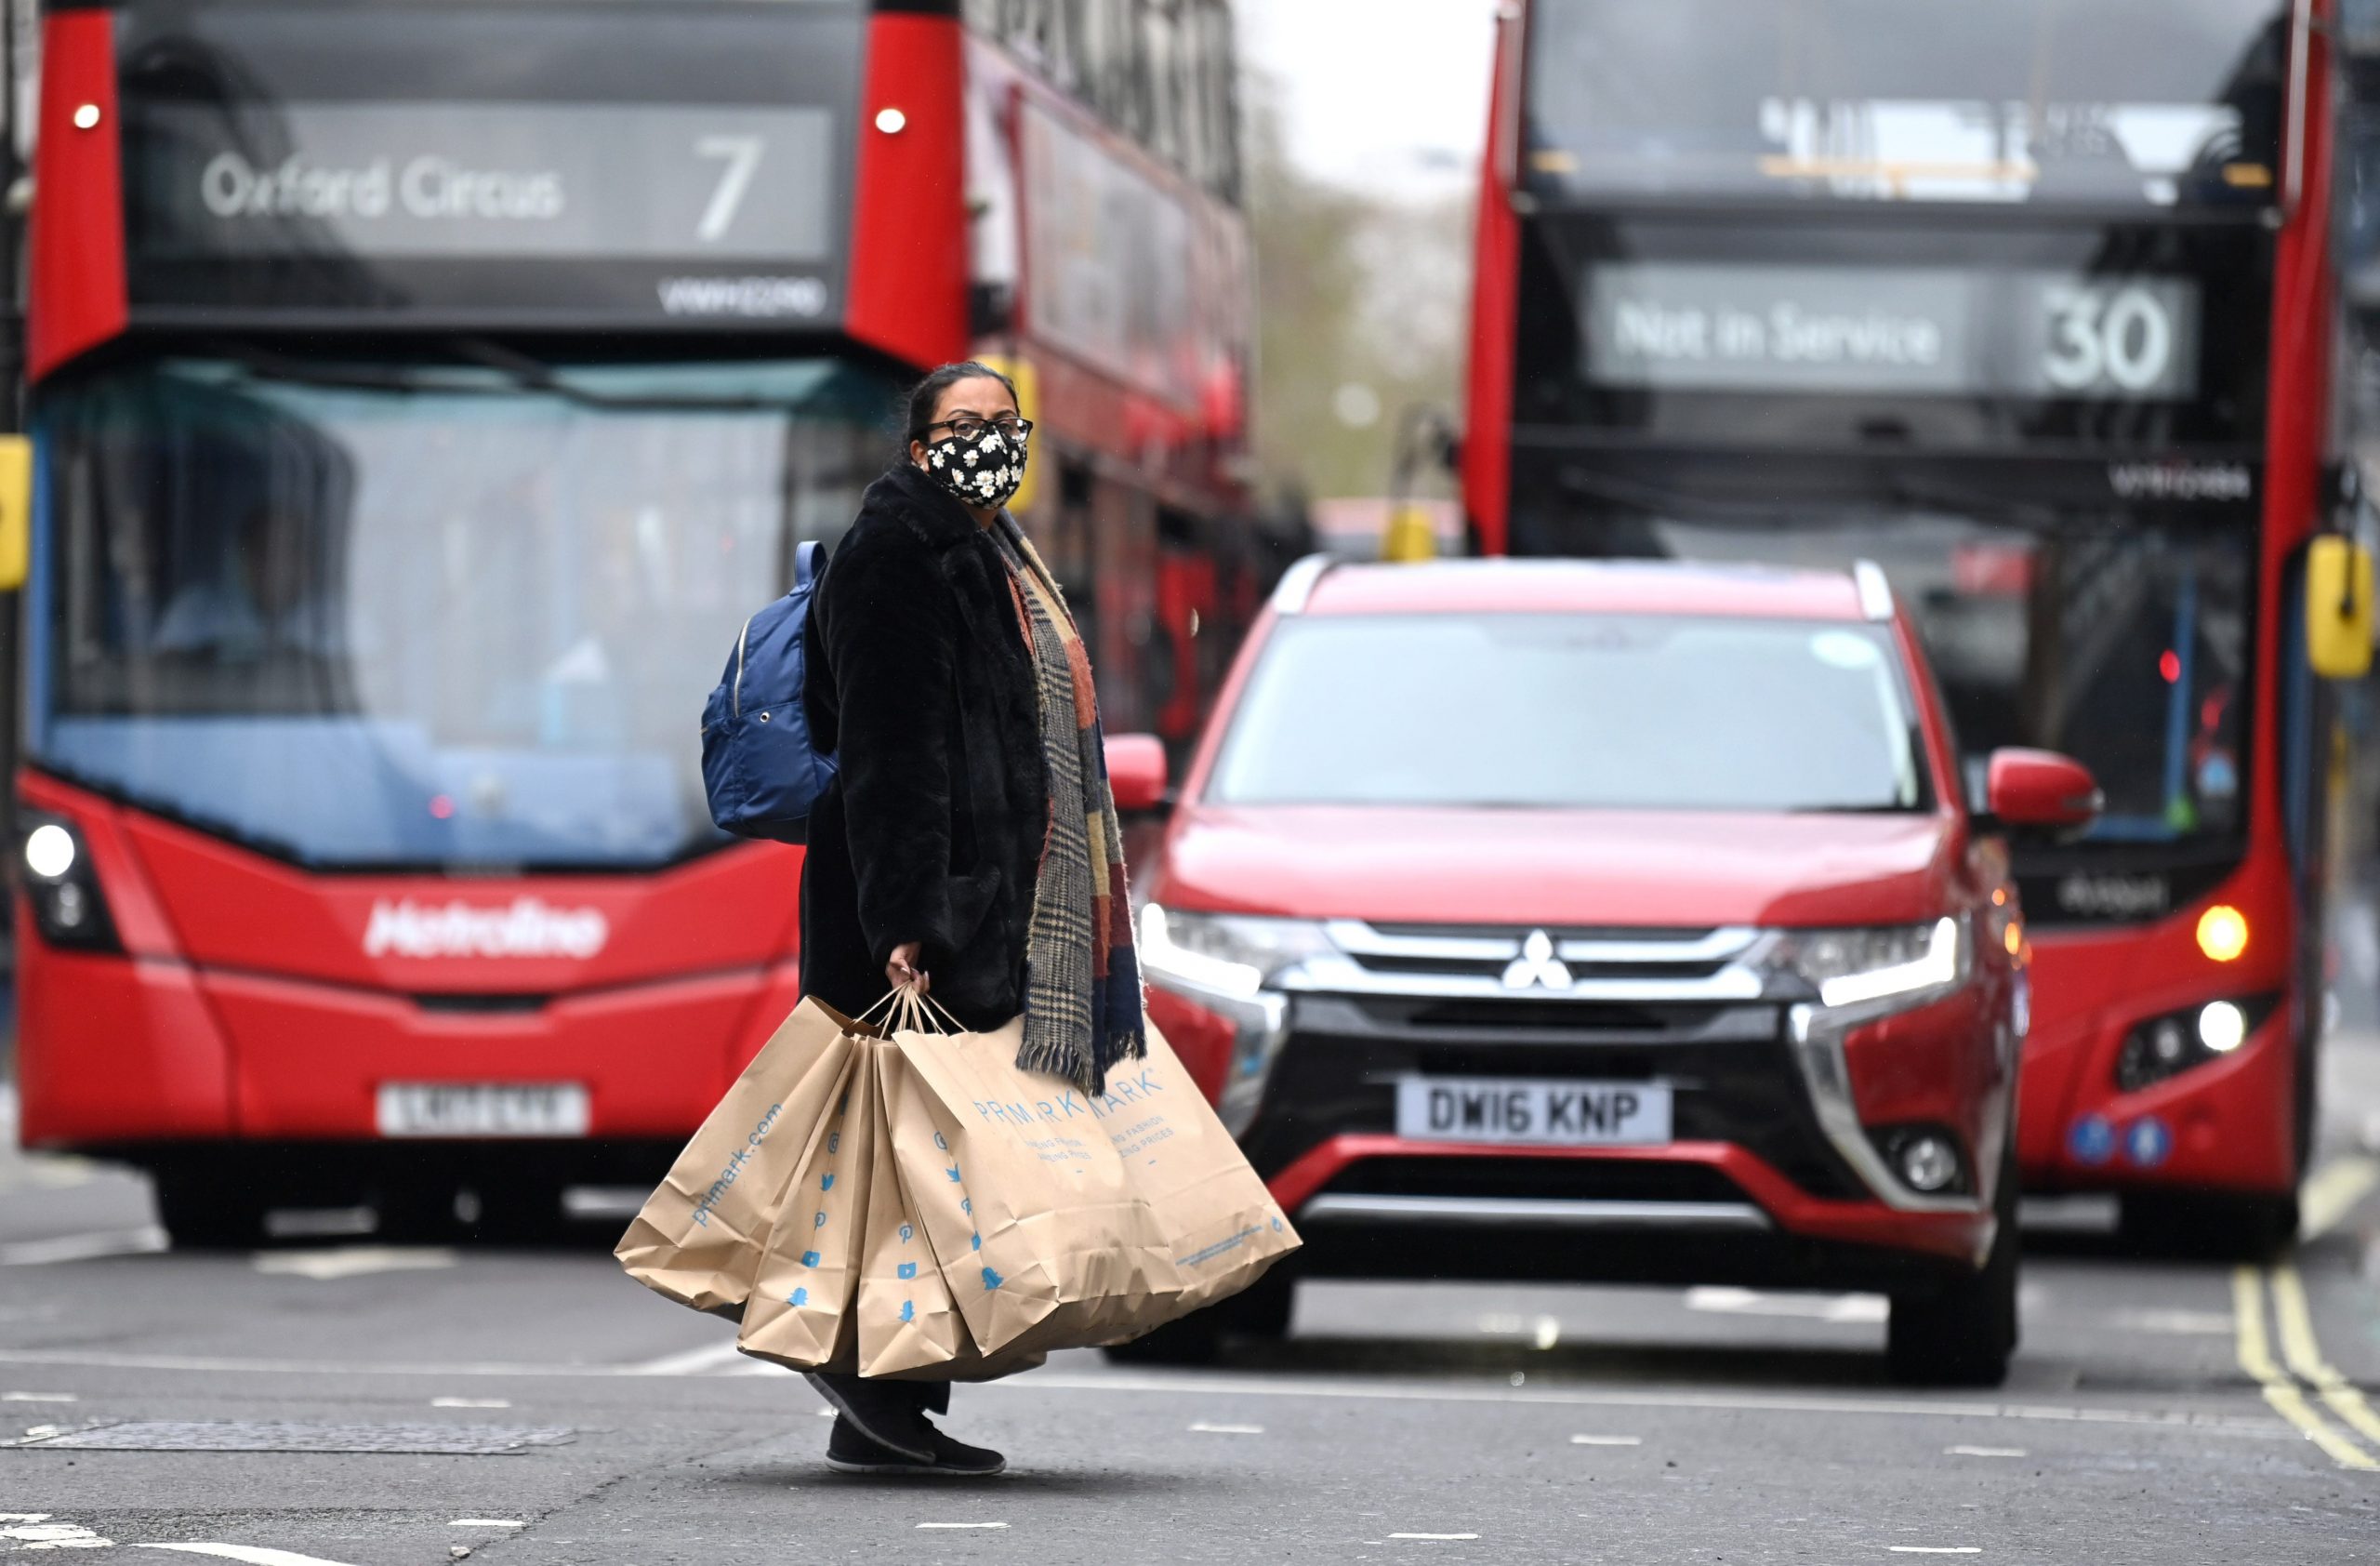 UK woman shopping shops red bus economy reopens London